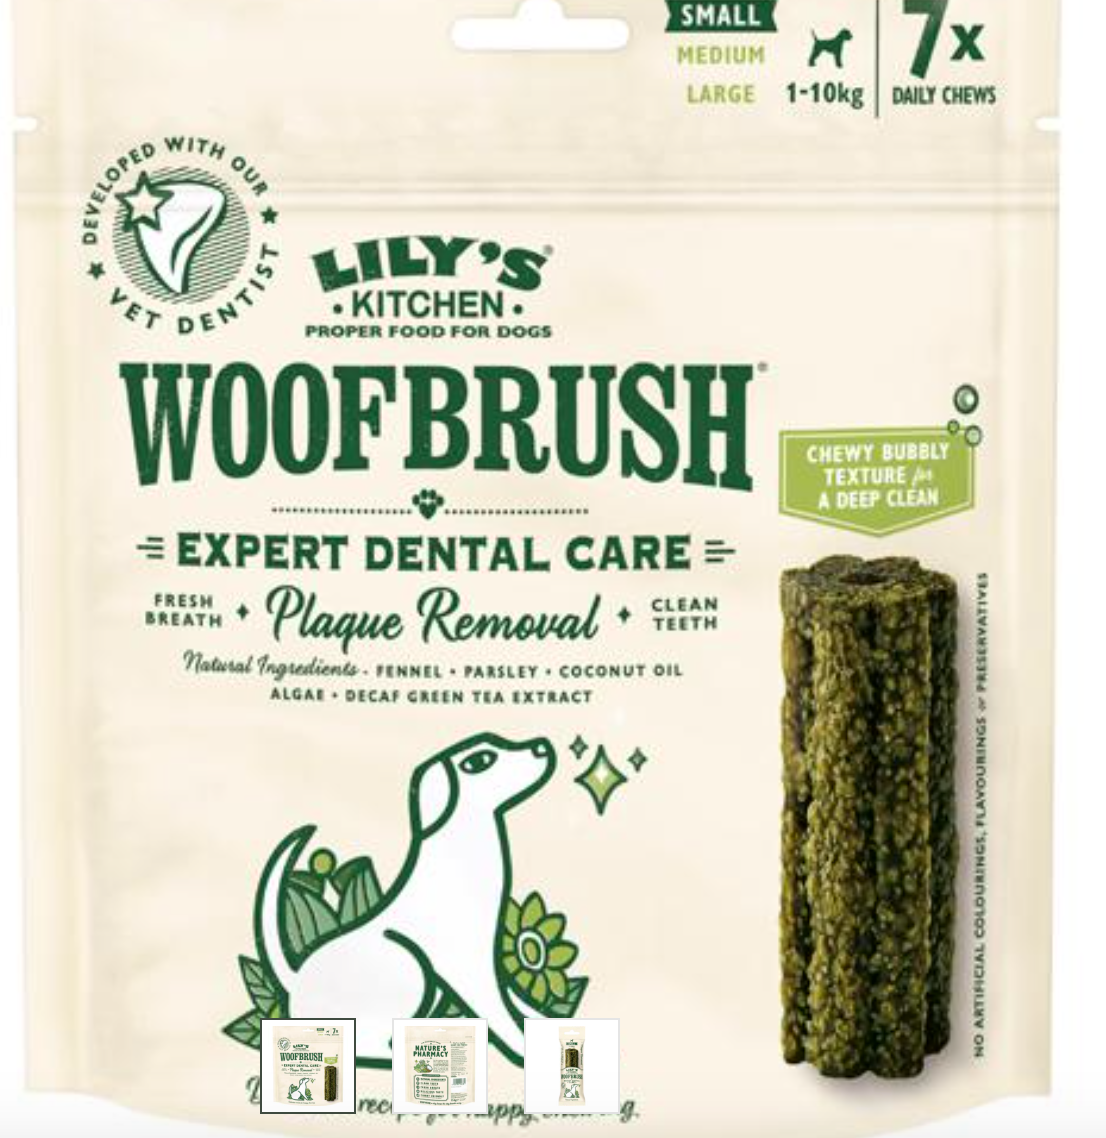 Woofbrush Dental Care small